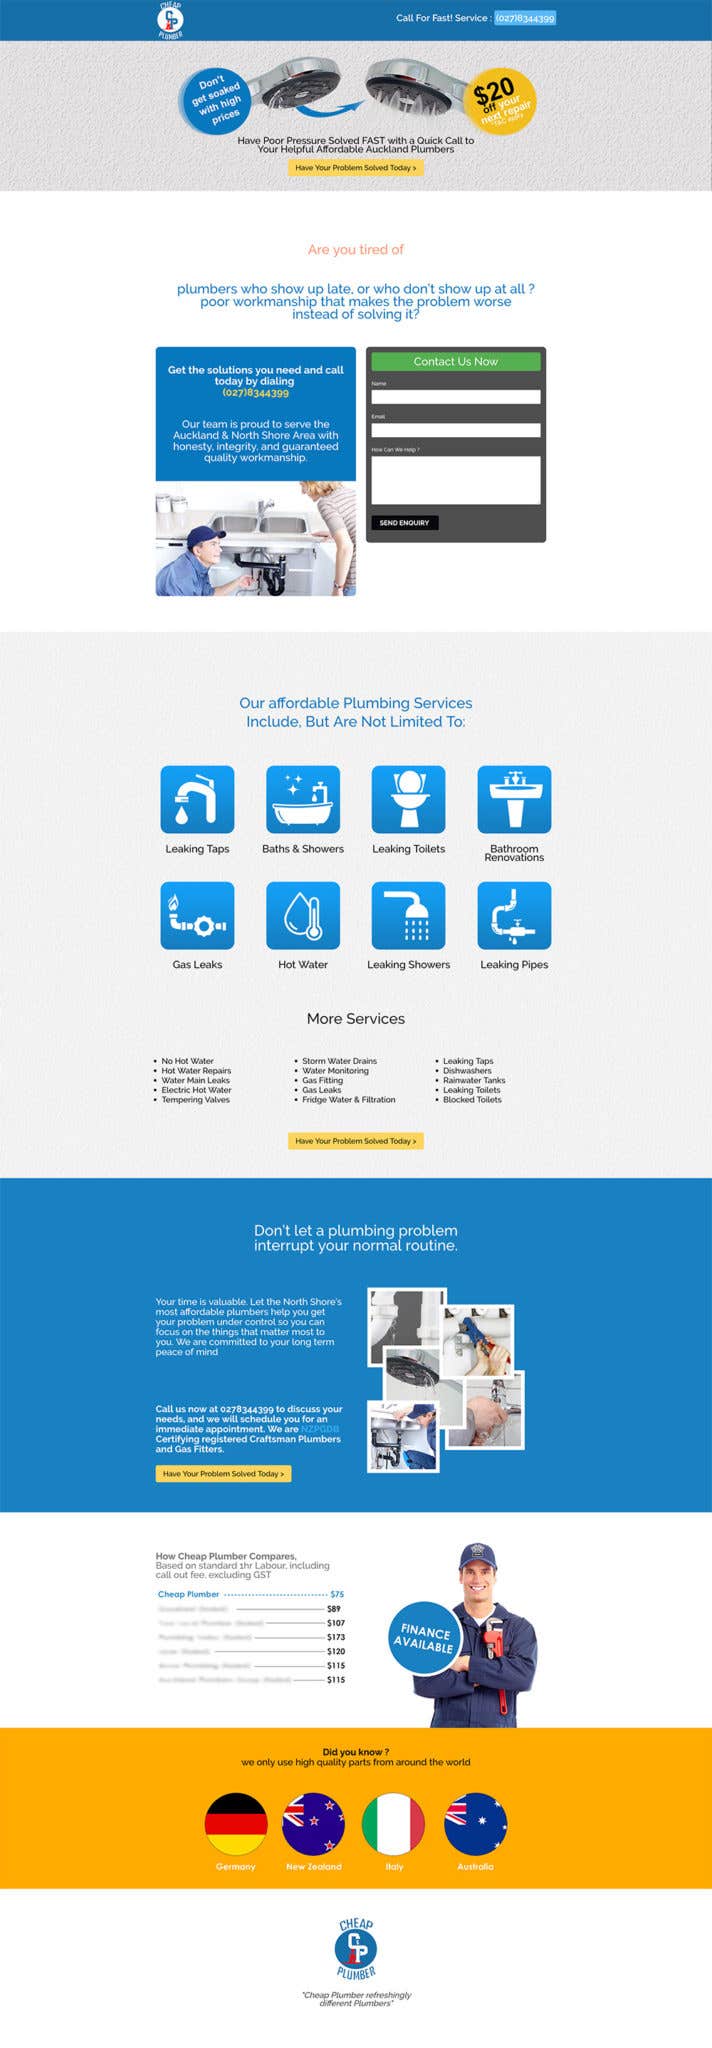 Landing Page For a Plumbing Service